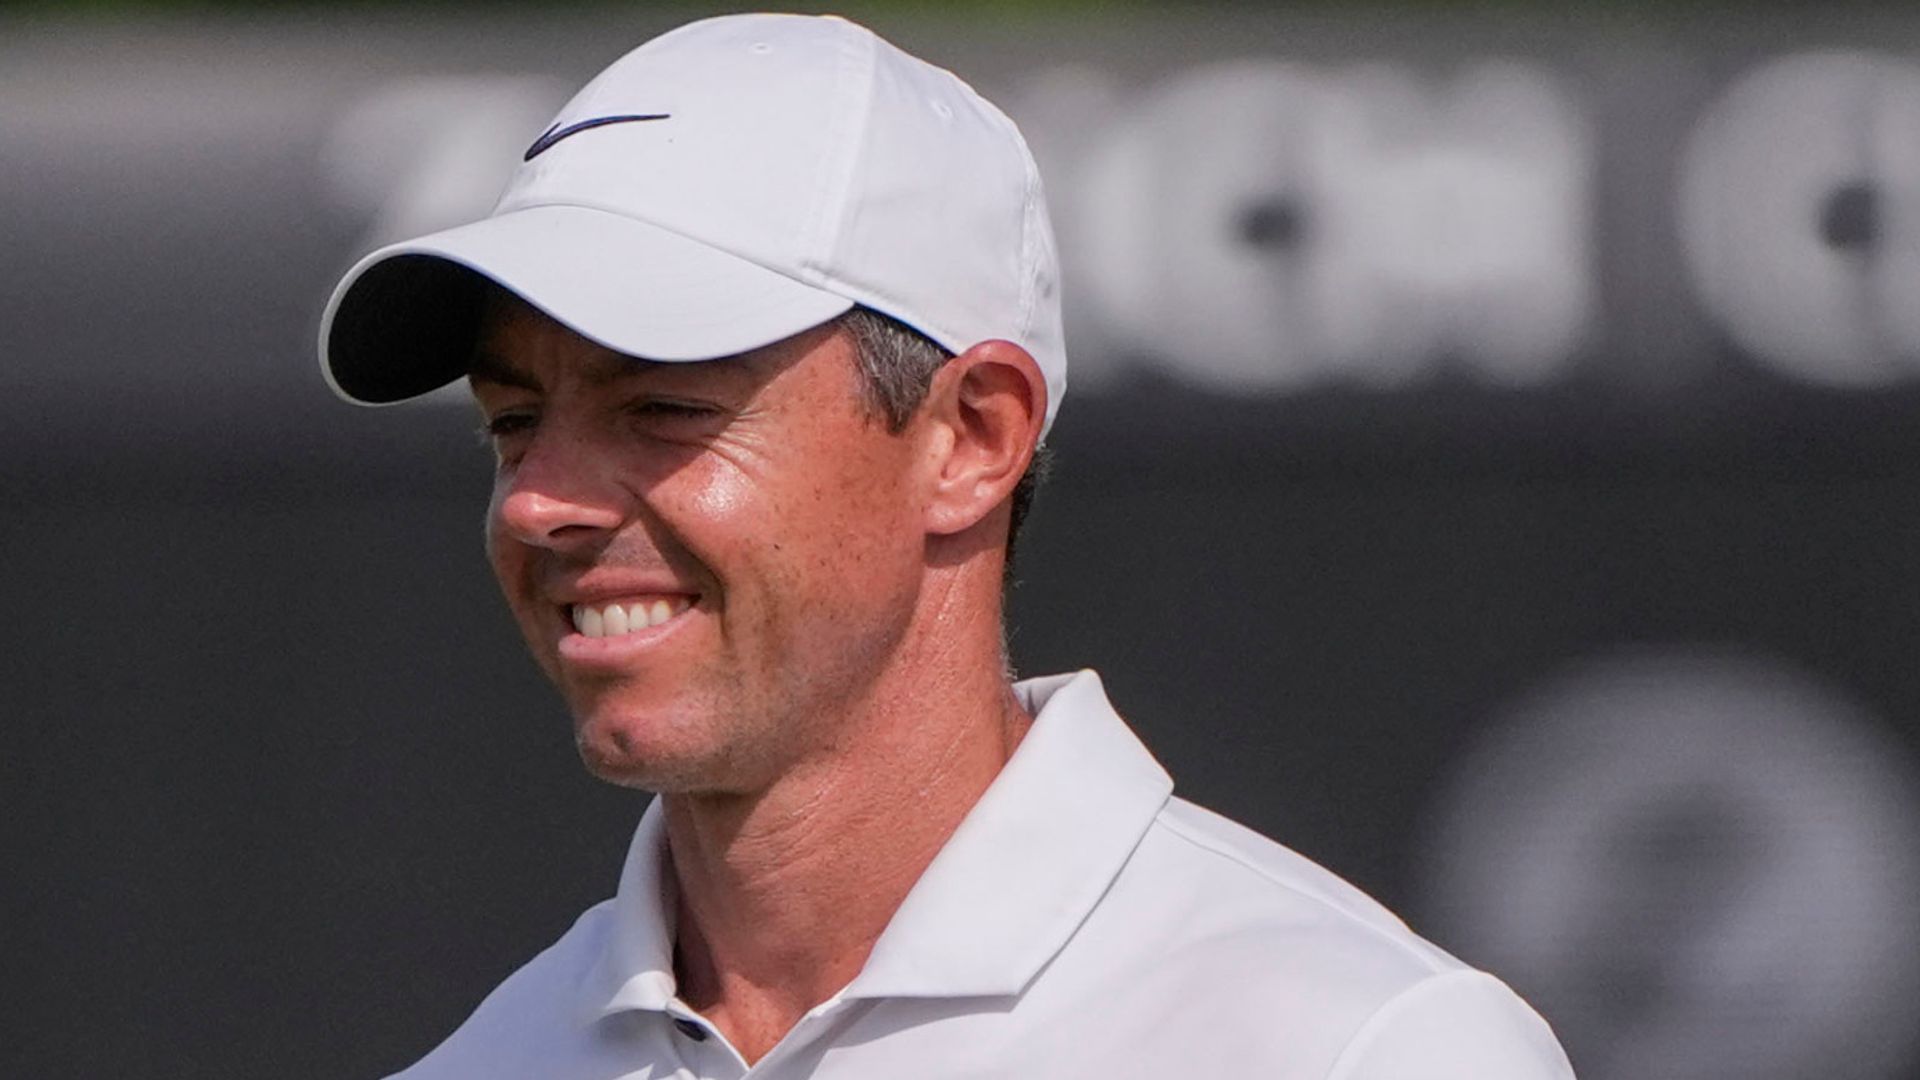 Podcast: Confidence building for McIlroy ahead of major push?